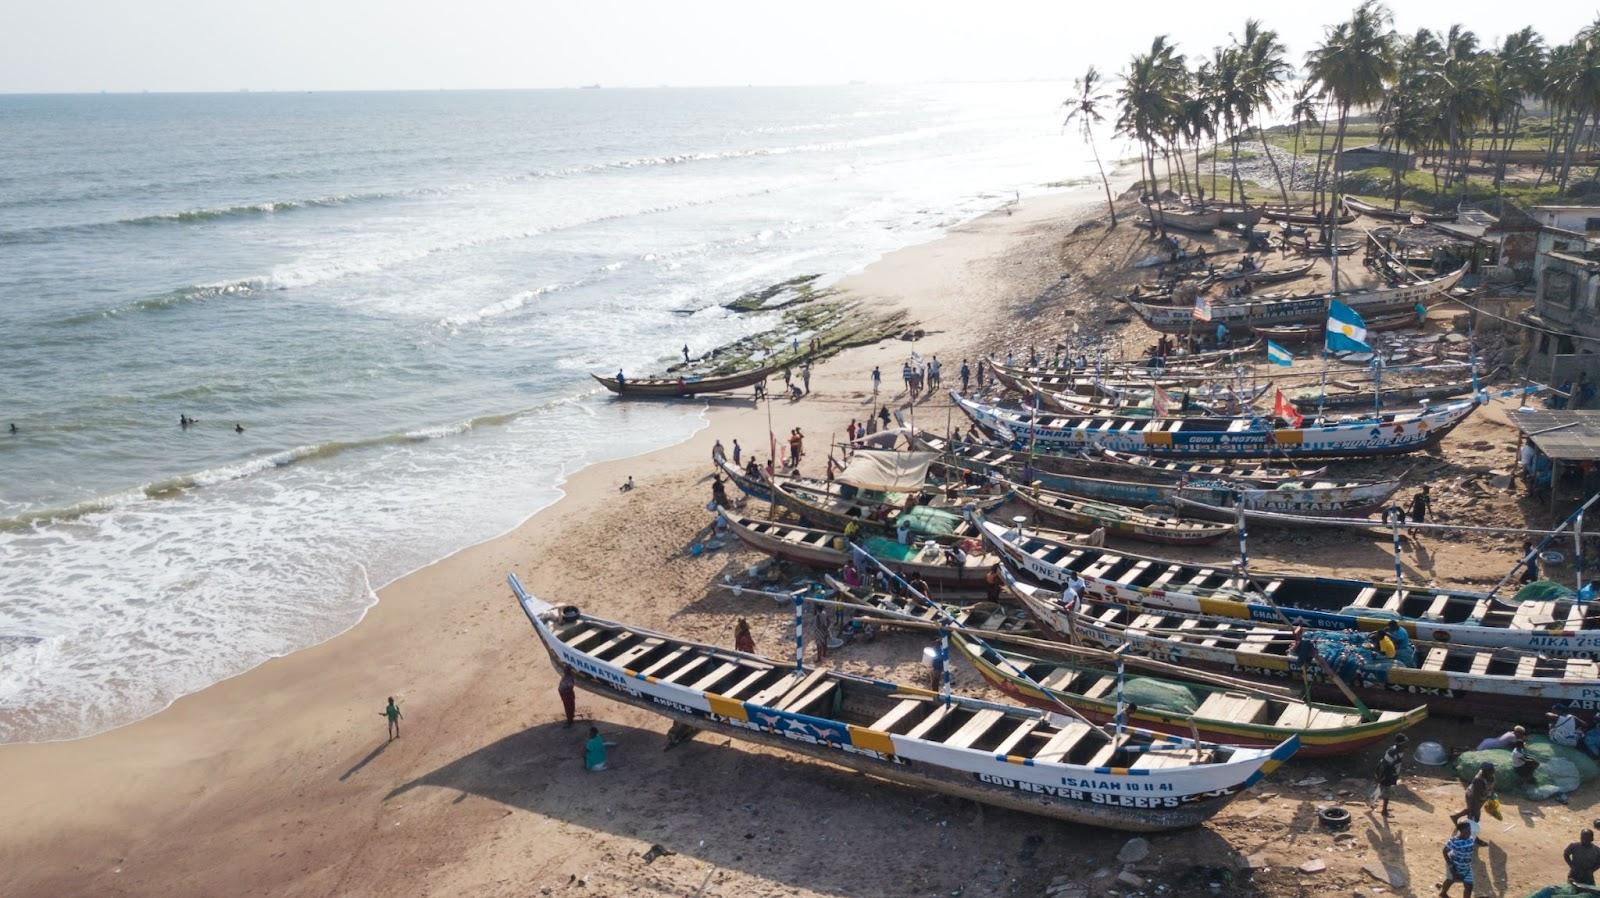 Fishermen repairing their boats on the beach after a days fishing